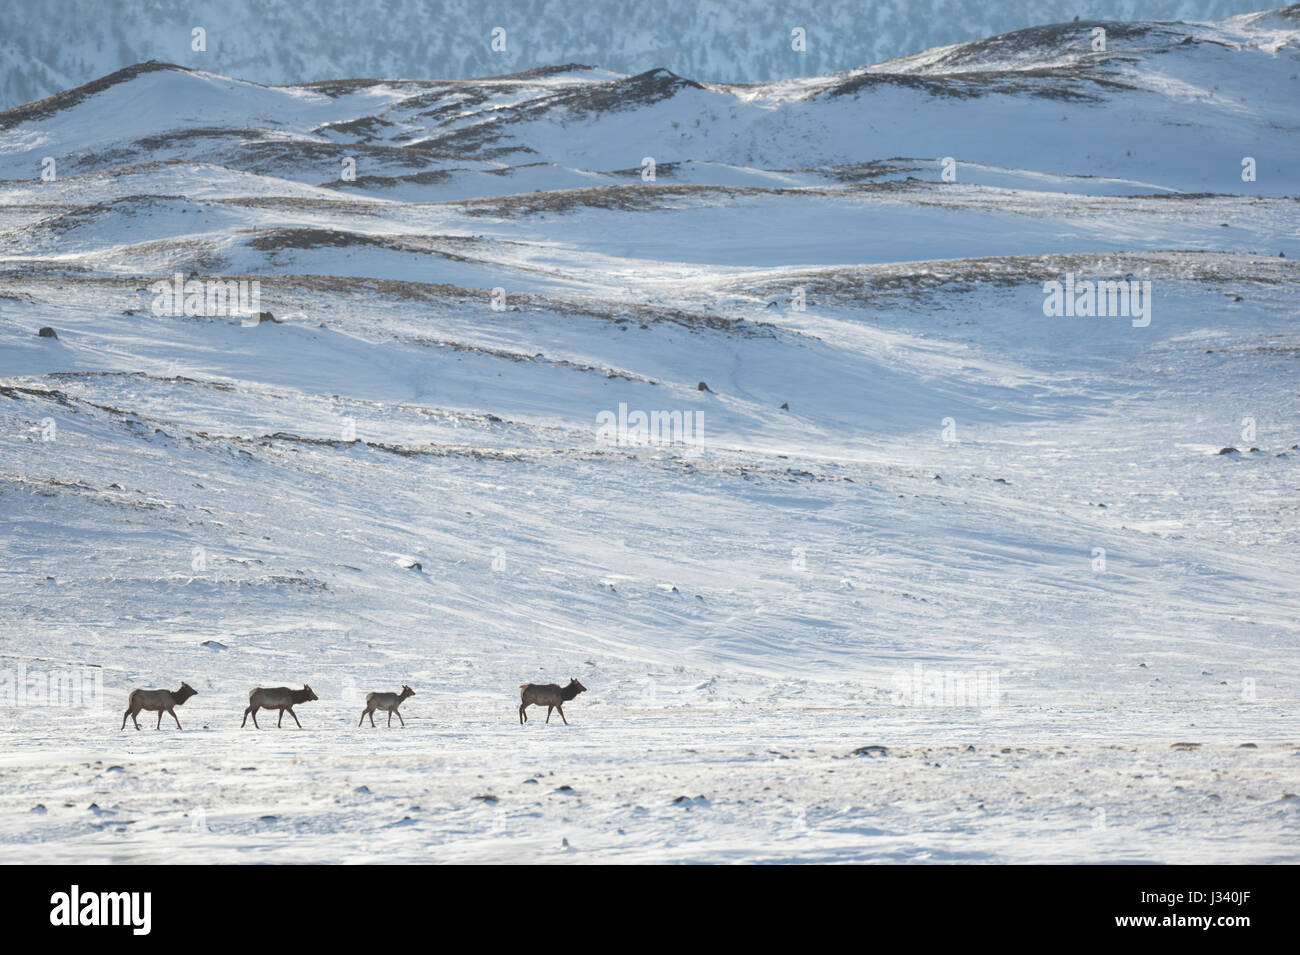 Elks / Wapitis ( Cervus canadensis ) in winter, three cows with a calf, walking, migrating through snow covered countryside, Yellowstone NP, WY, USA. Stock Photo